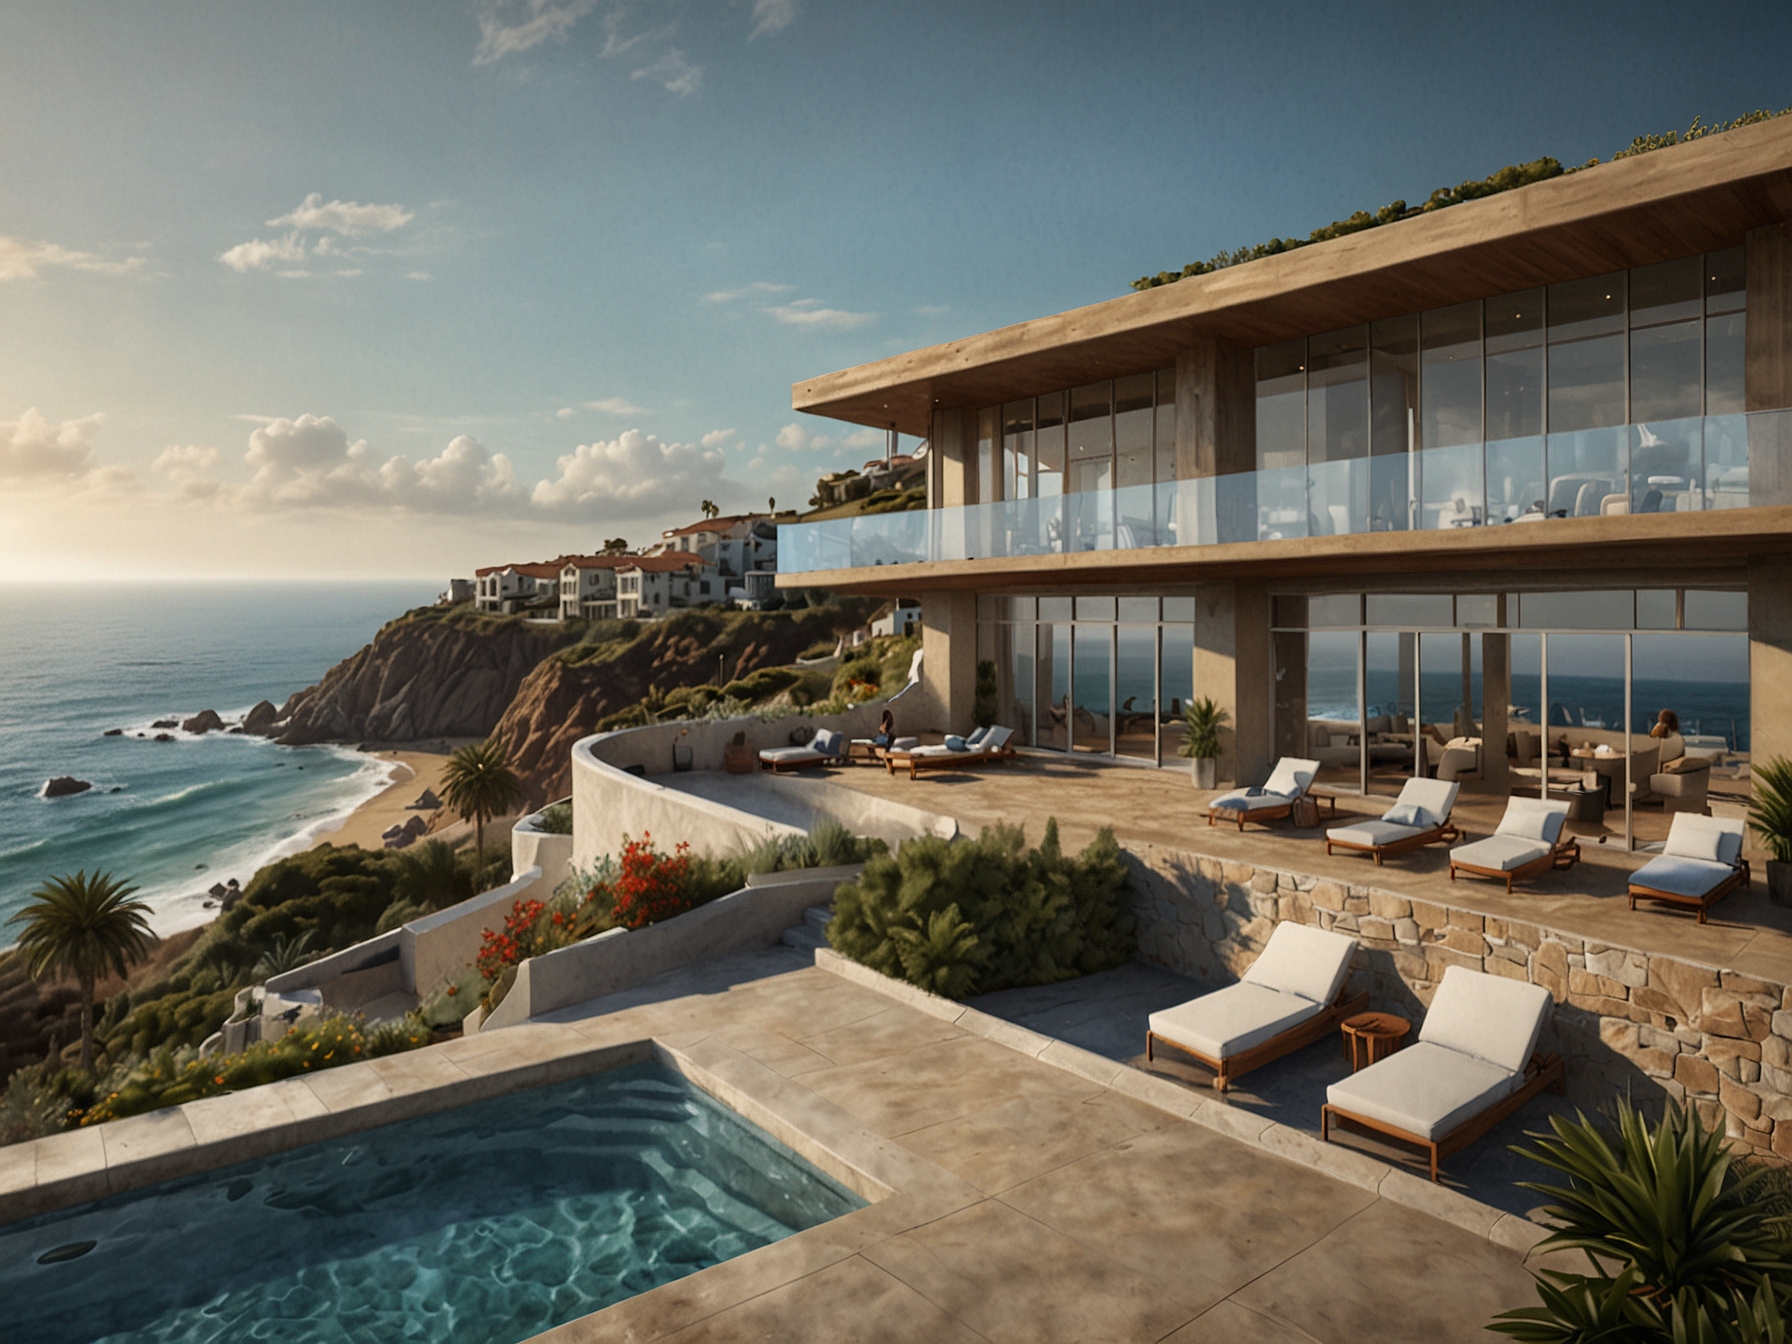 Architectural rendering of the high-end Dana House hotel showcasing its luxurious amenities, rooftop infinity pool, and stunning ocean views, embodying Dana Point's coastal charm.